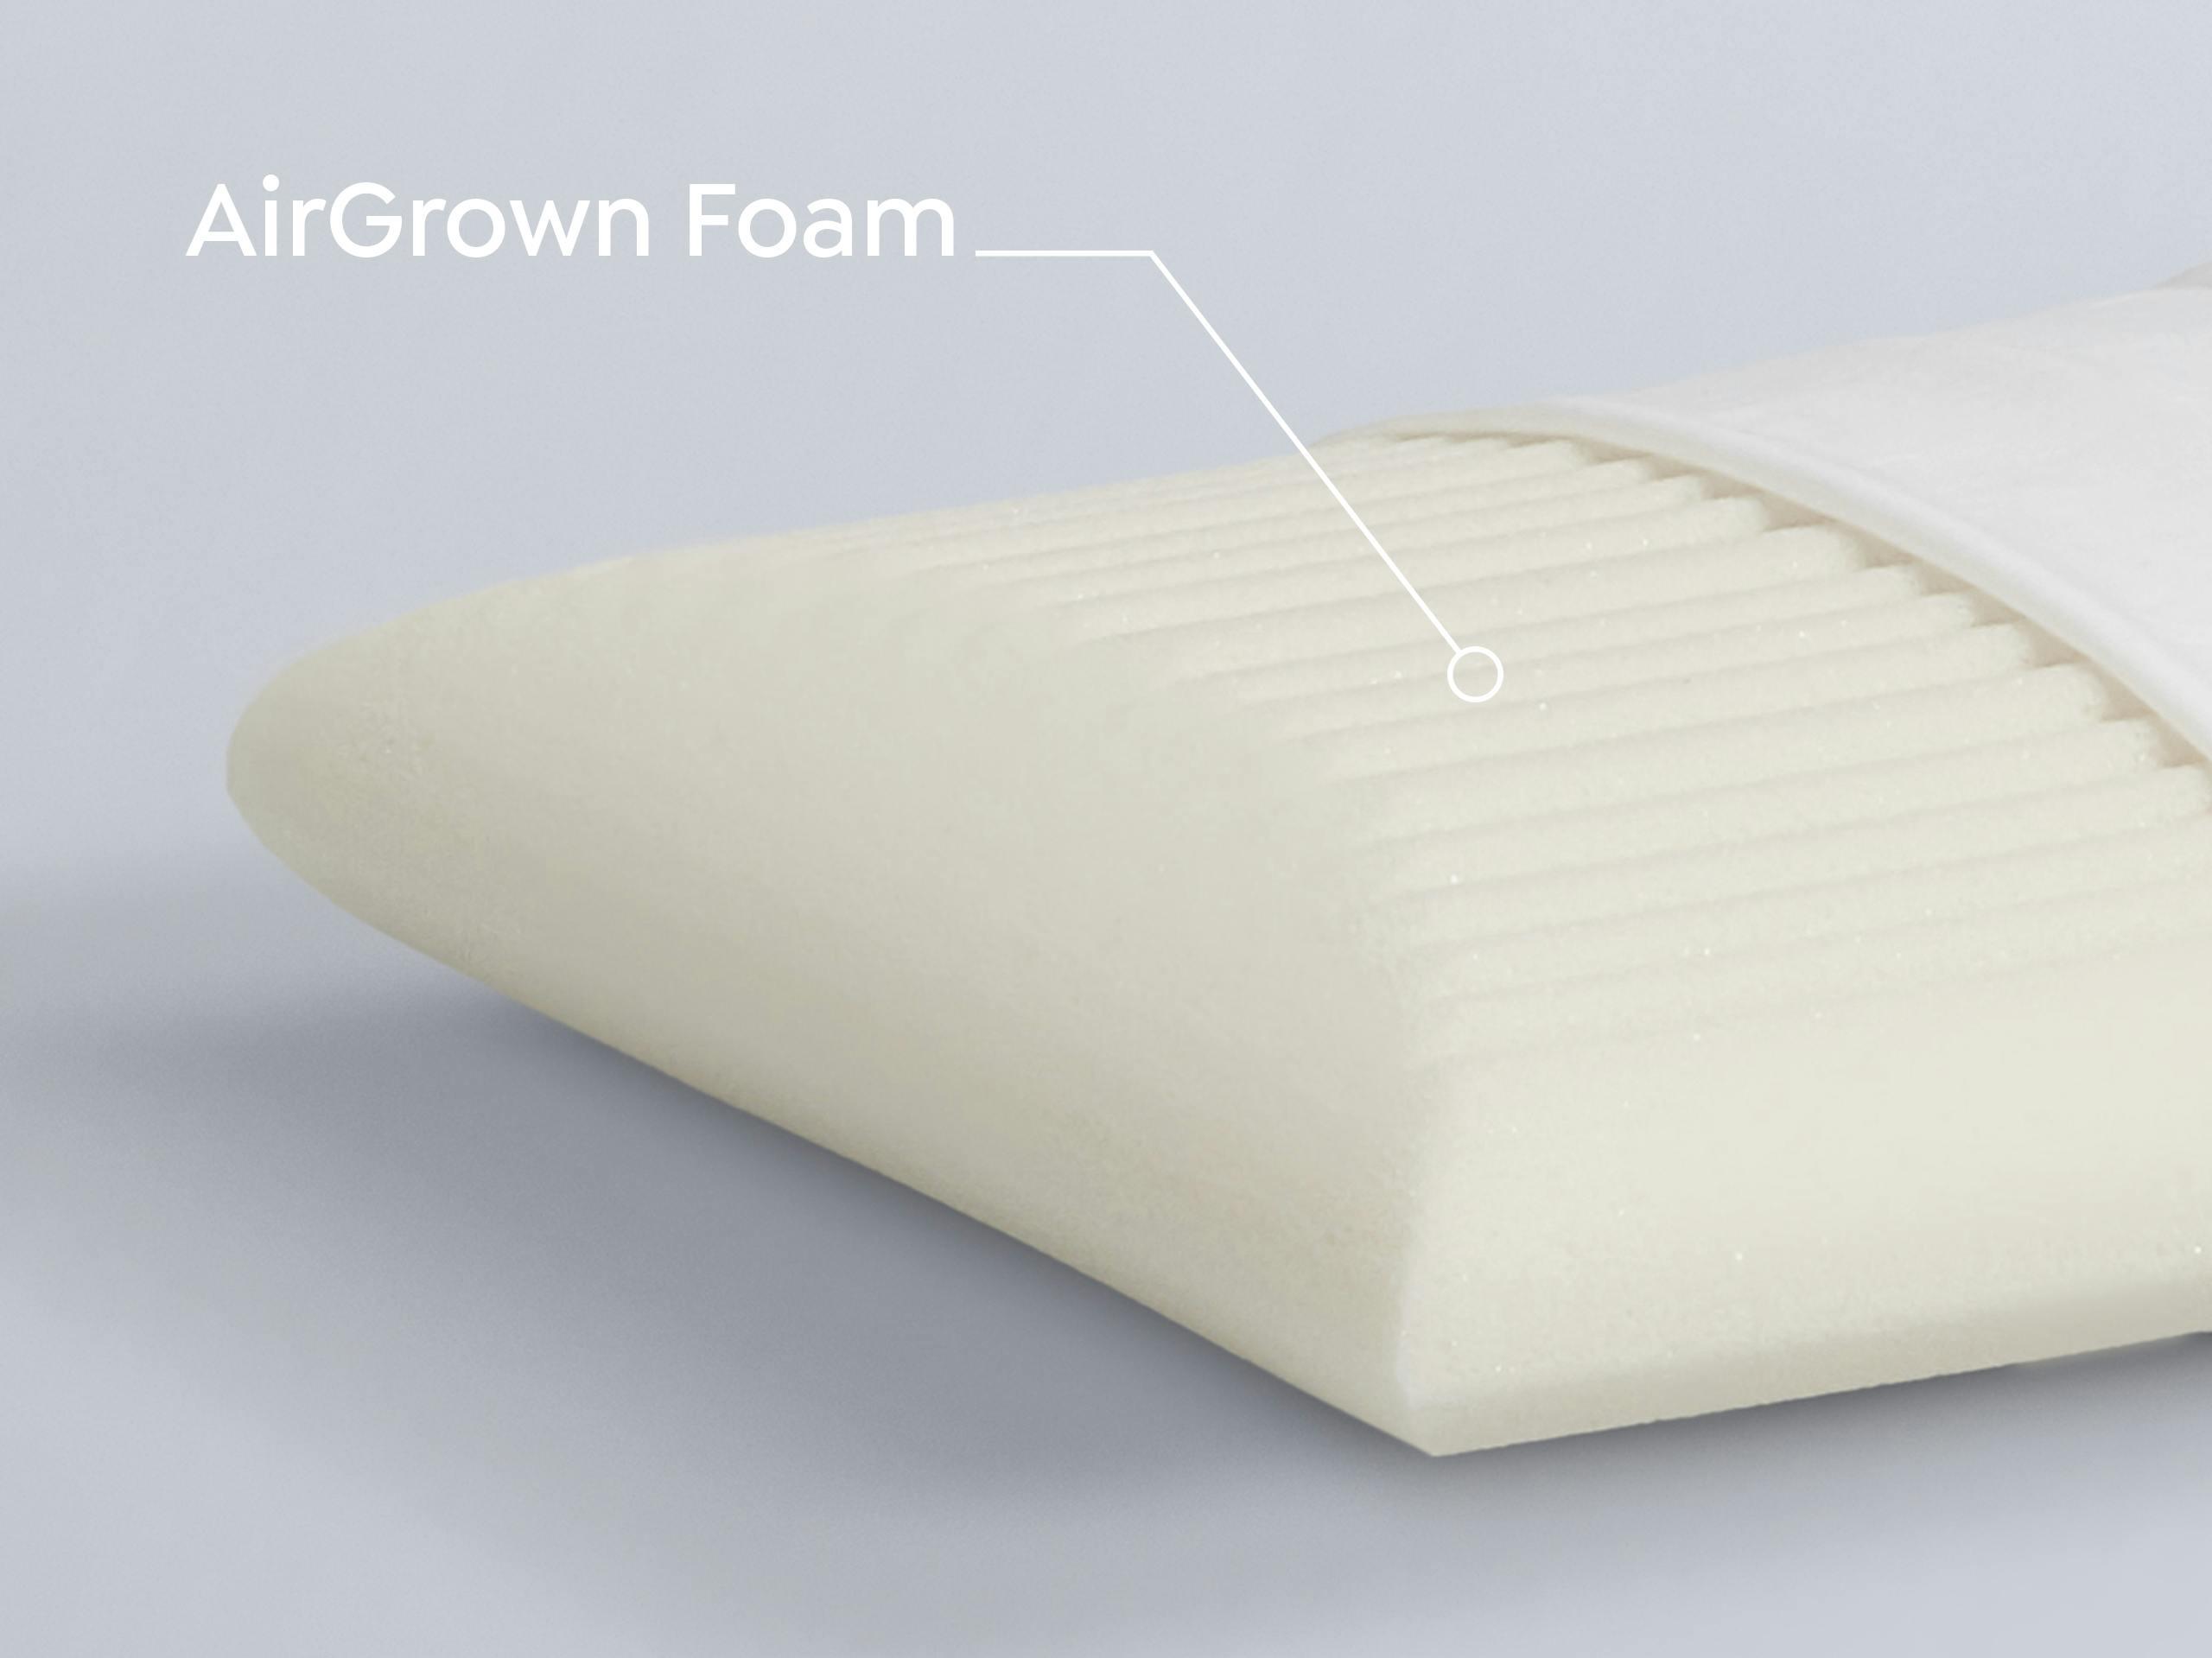 Pillow showing the AntiGravity Surface Foam labelled with "Air Grown Foam".